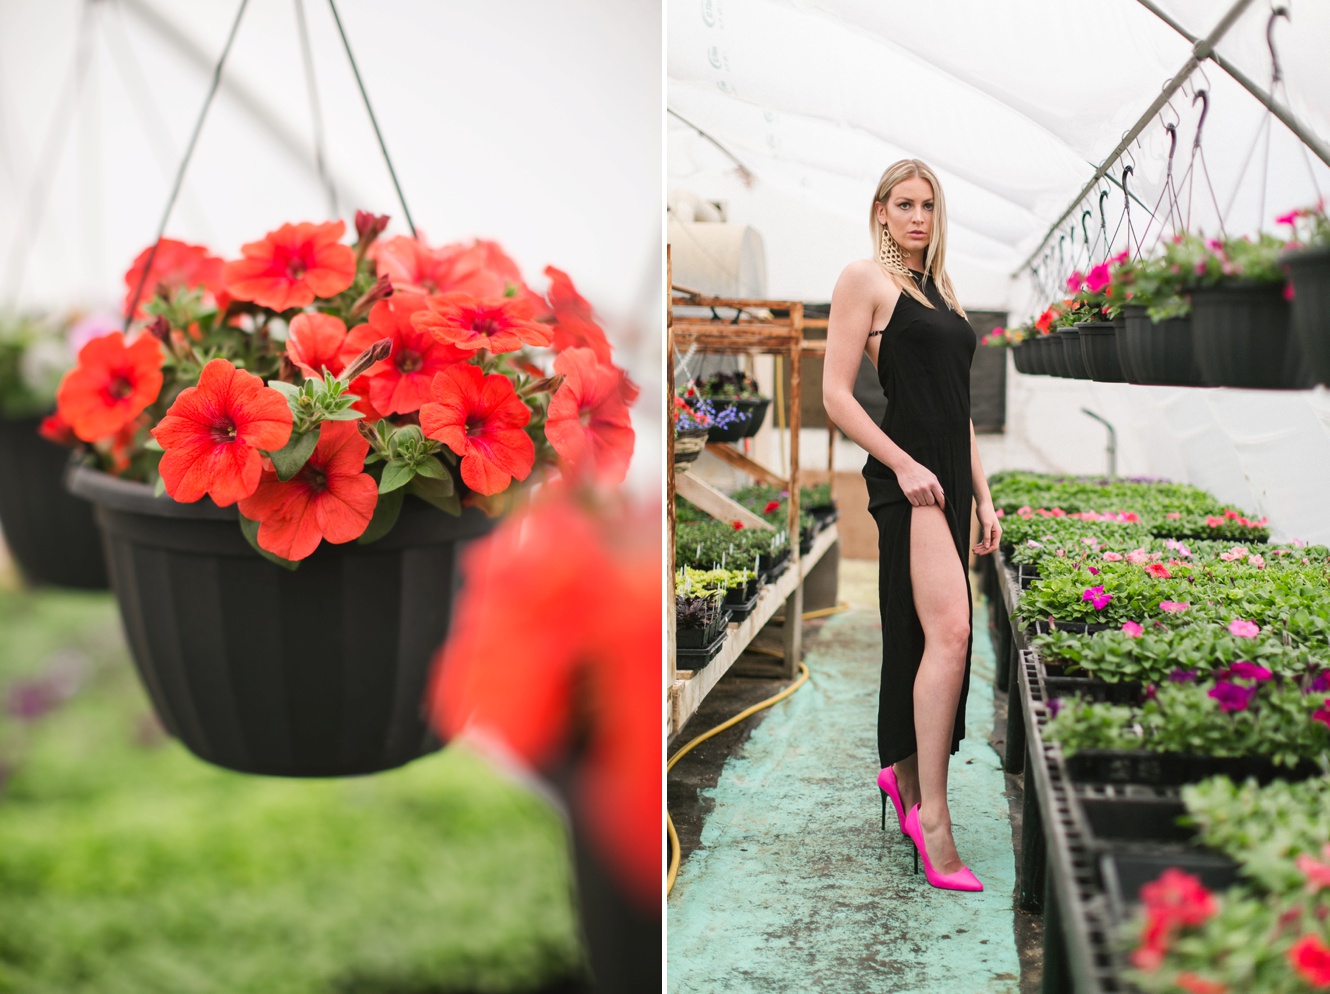 Givenchy inspired fashion photo shoot among petunia flowers in a greenhouse